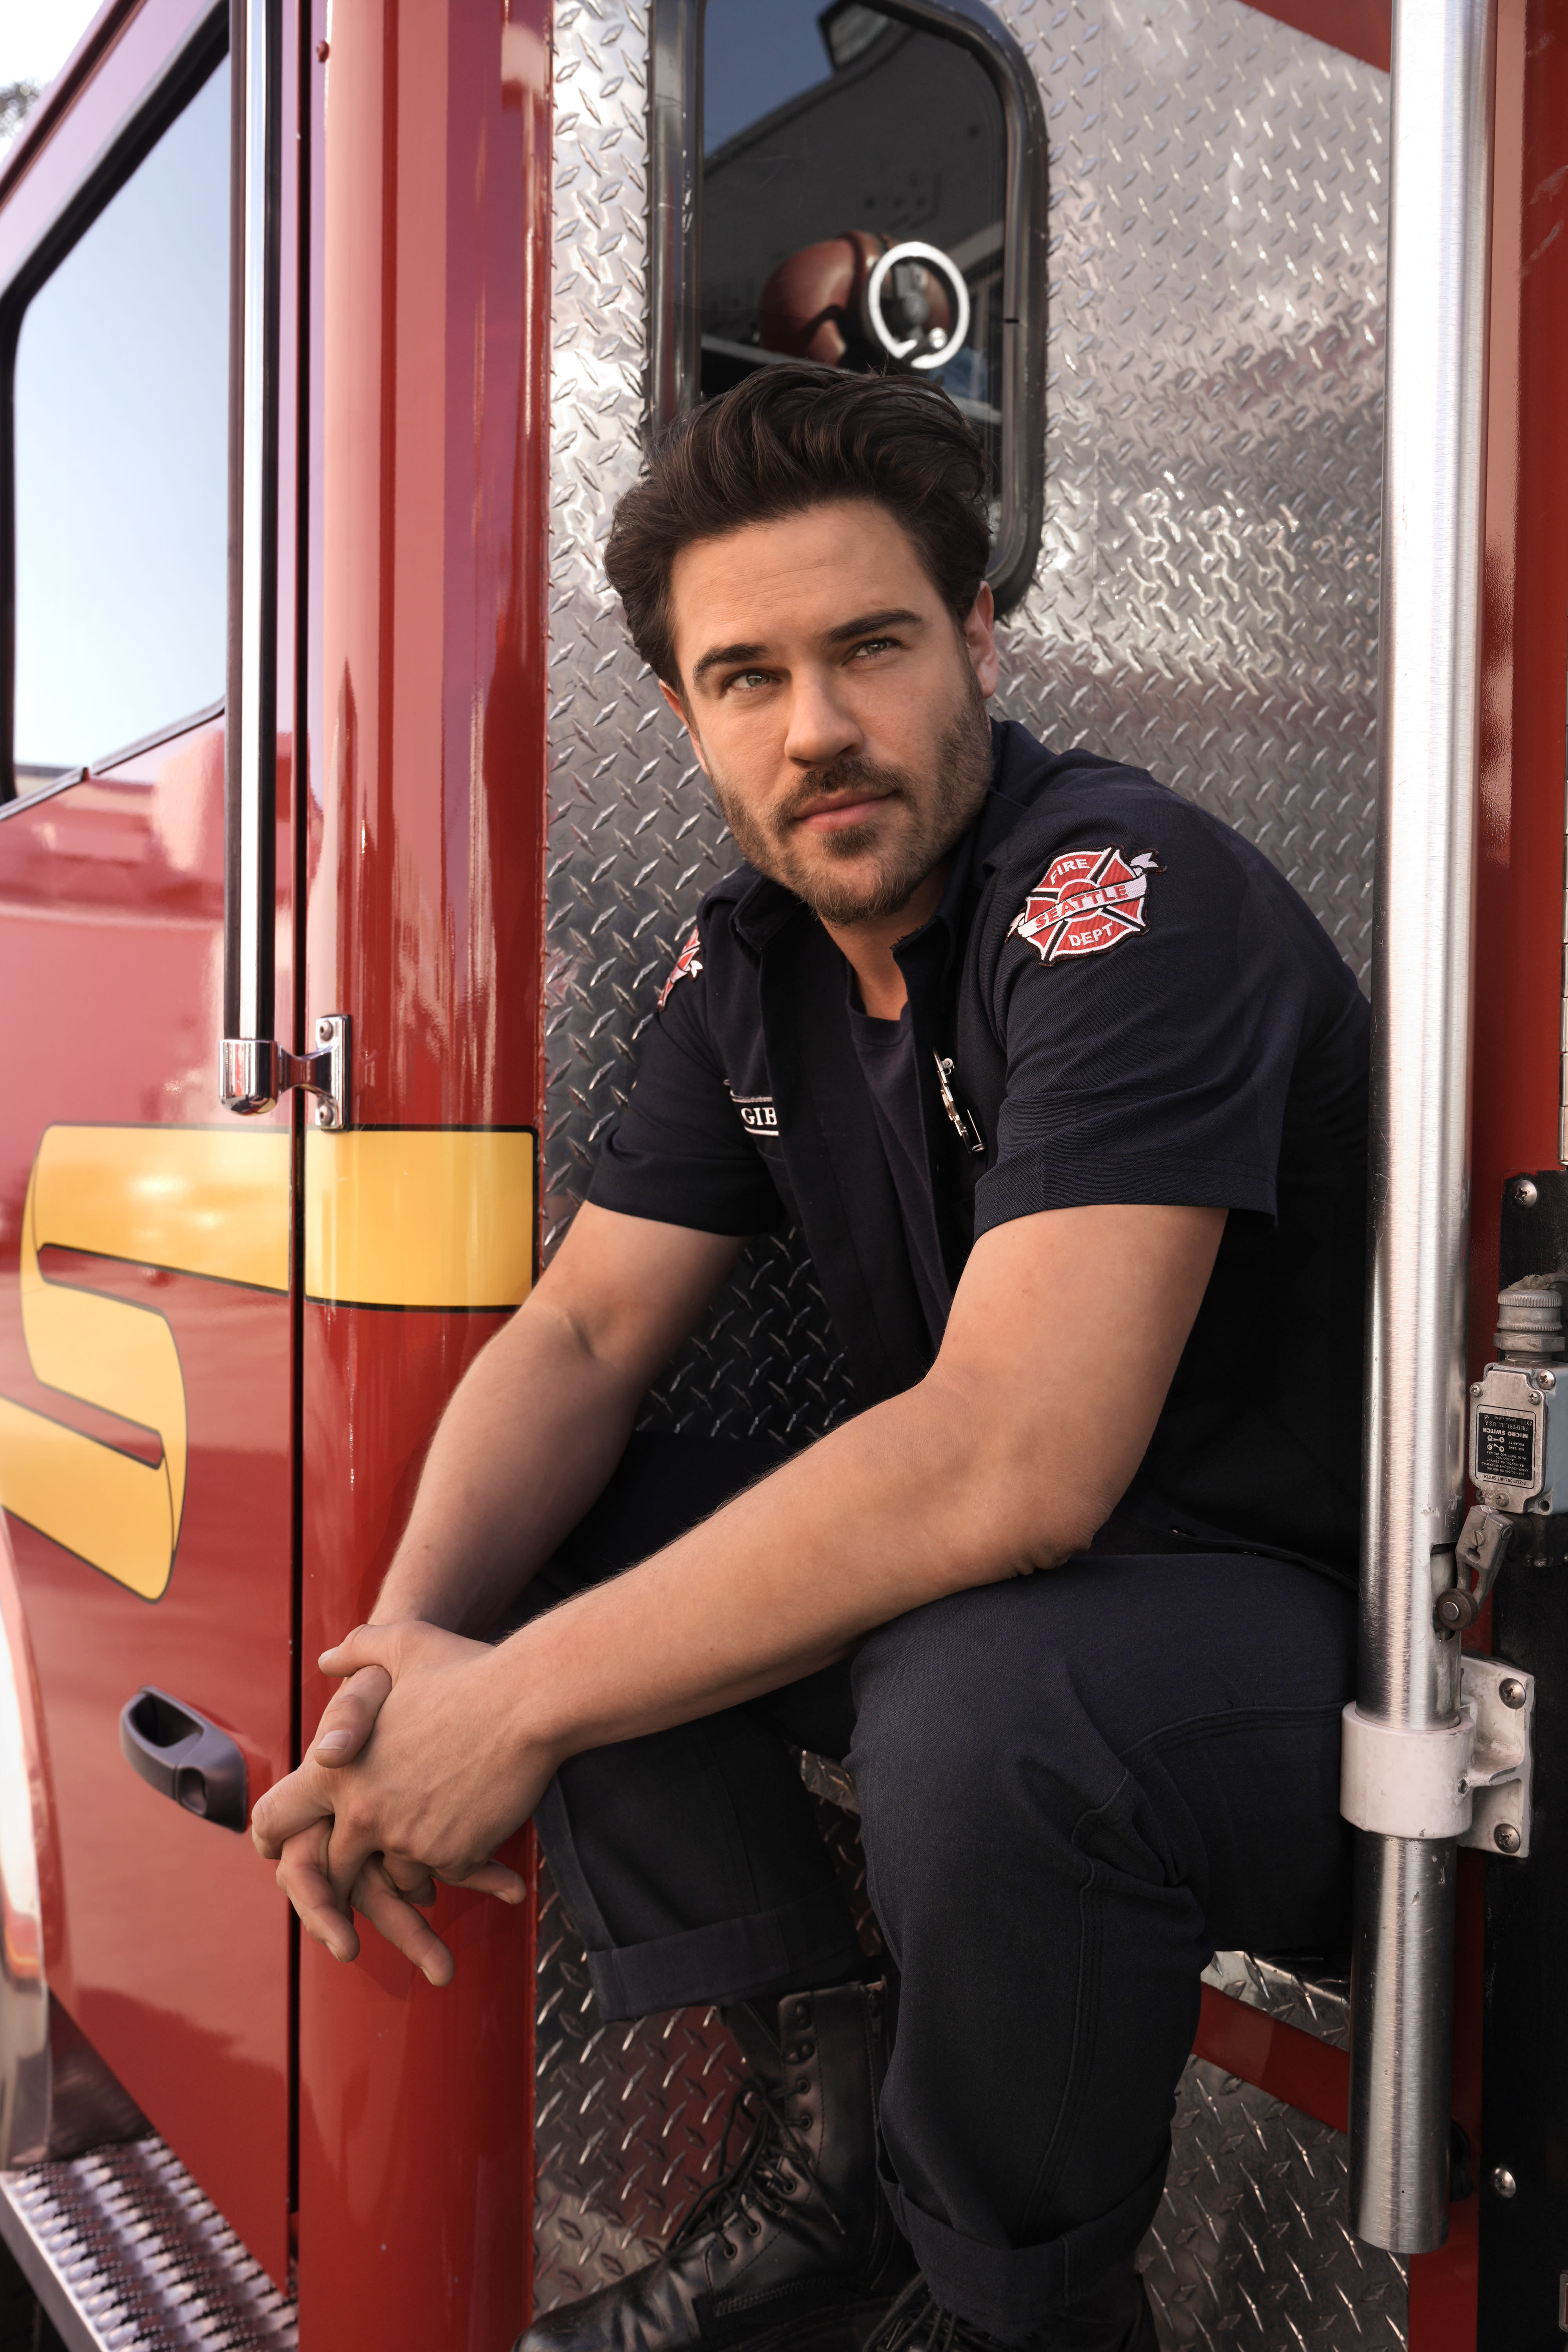 Cutting Station 19 for 9-1-1 Could Backfire on ABC - TV Fanatic